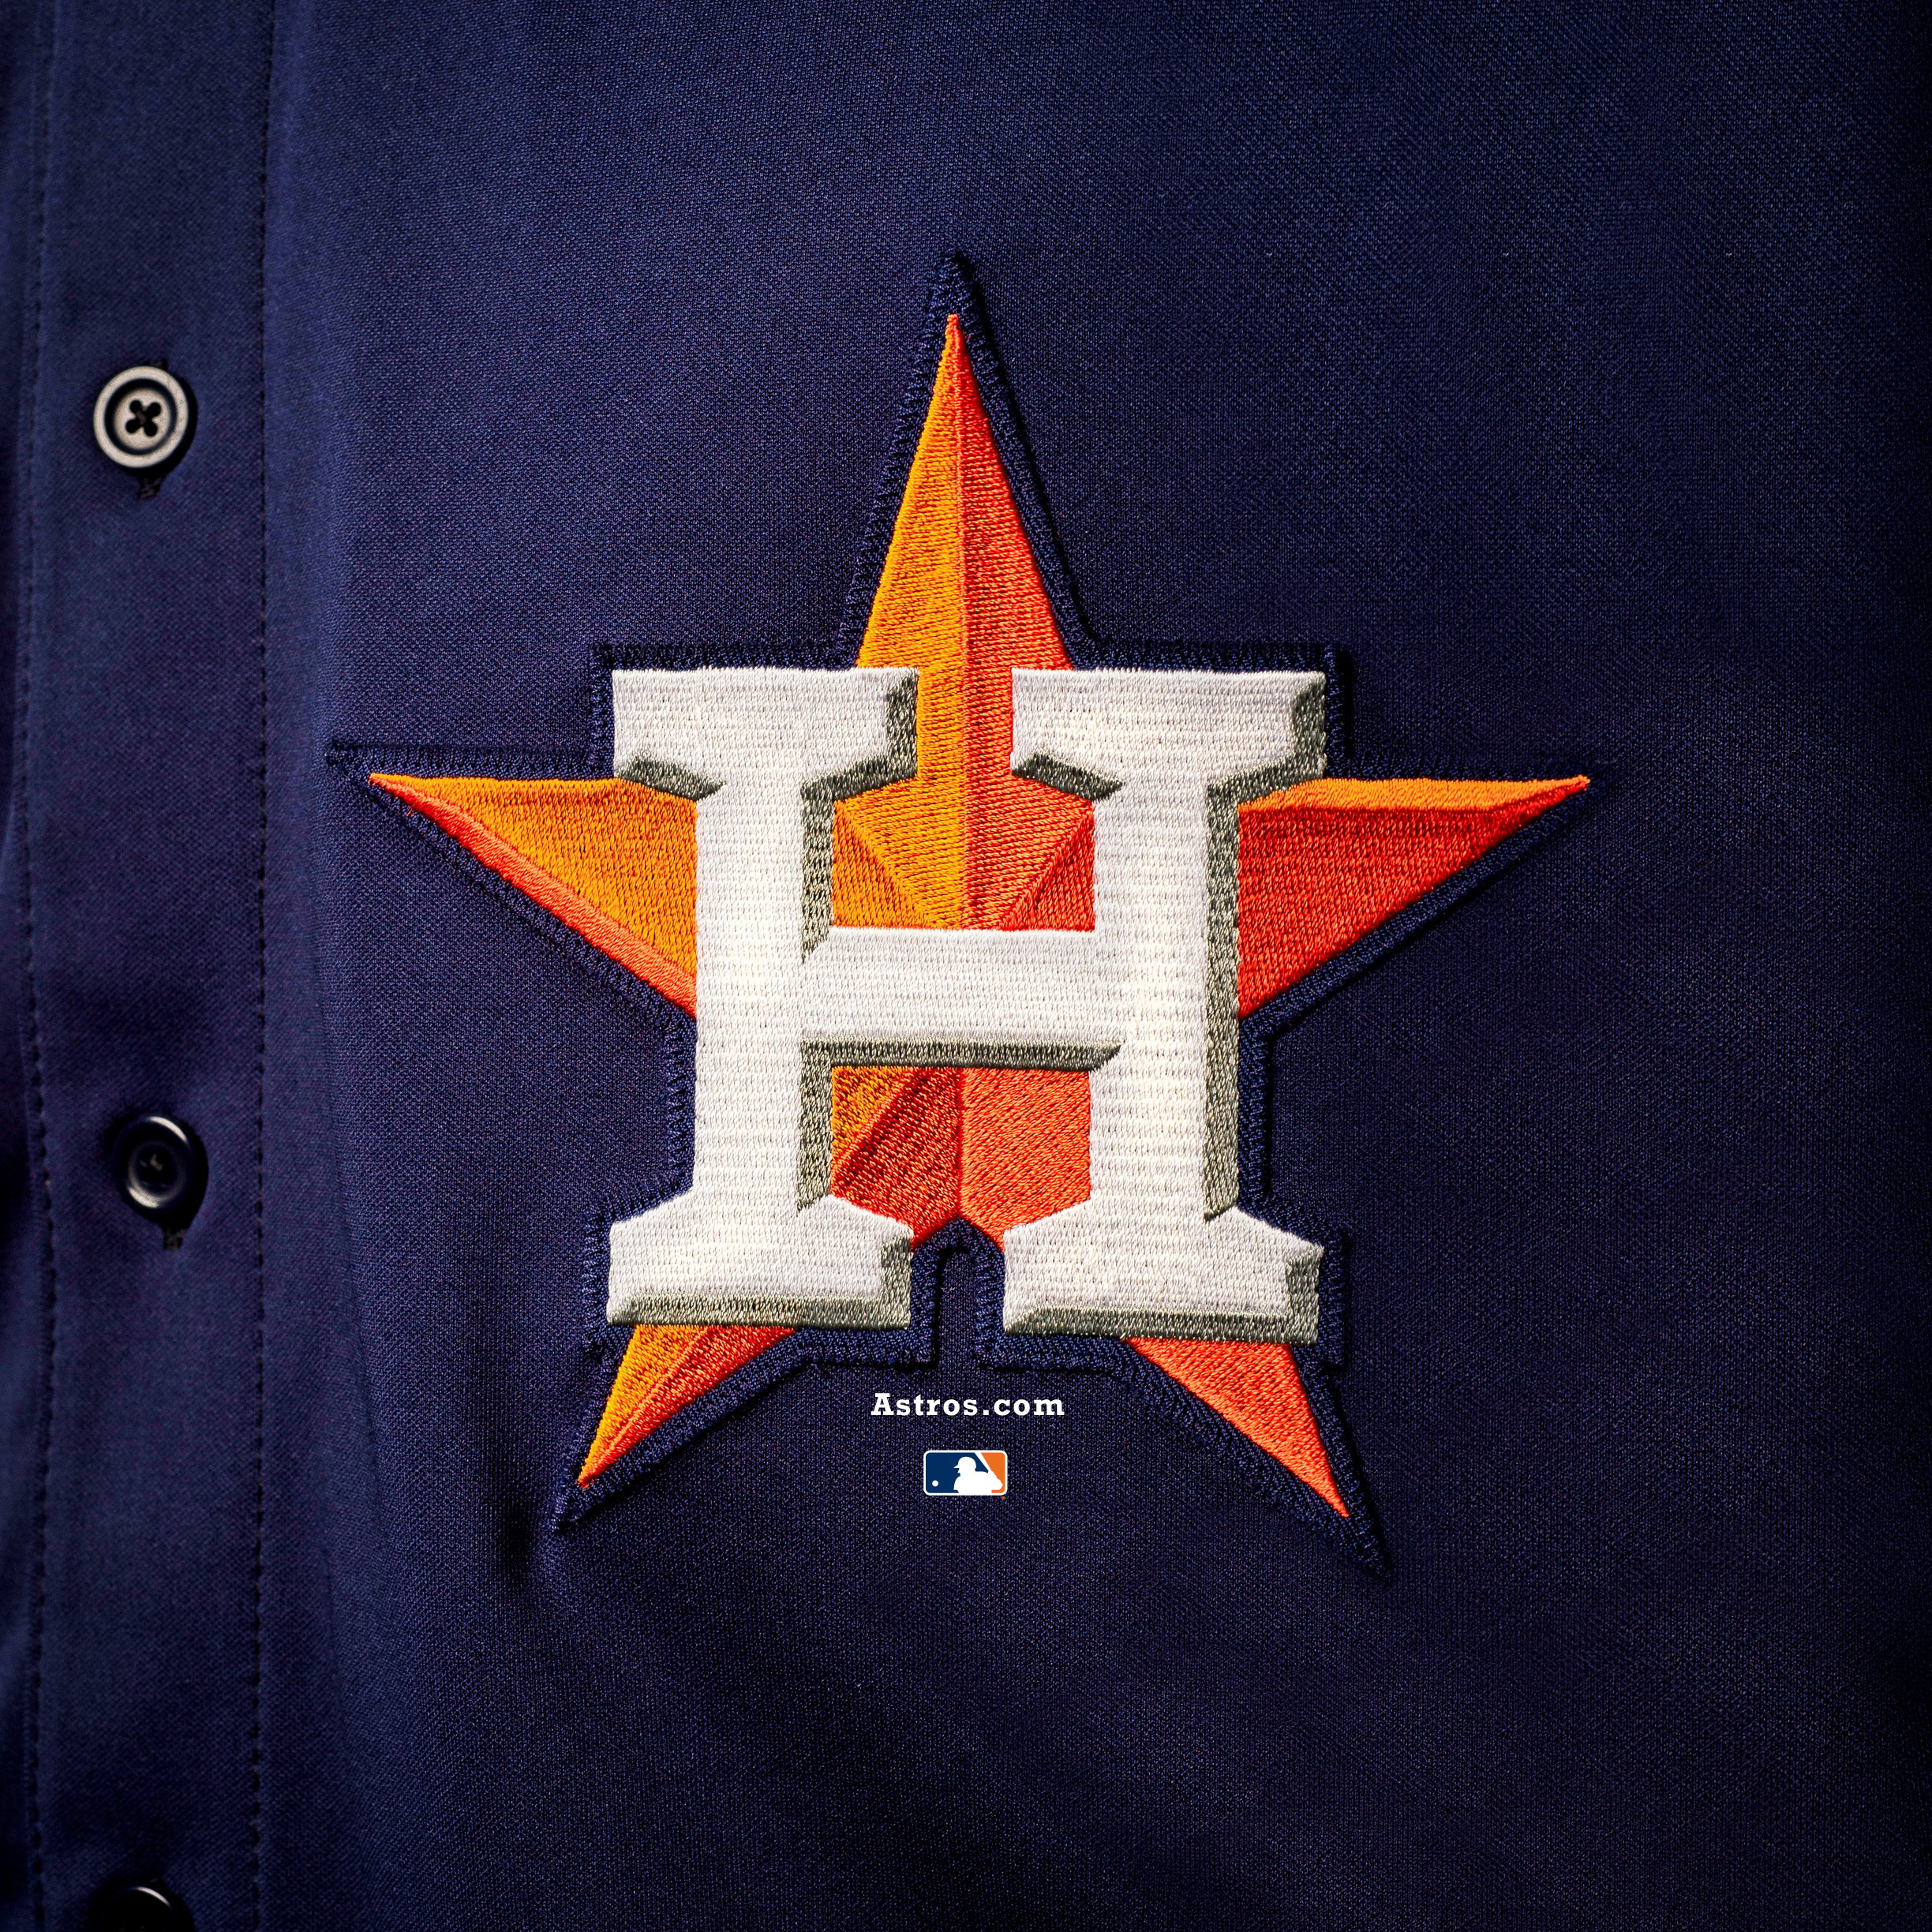 Astros Tablet Wallpaper   Players Images 2014 astroscom Tickets